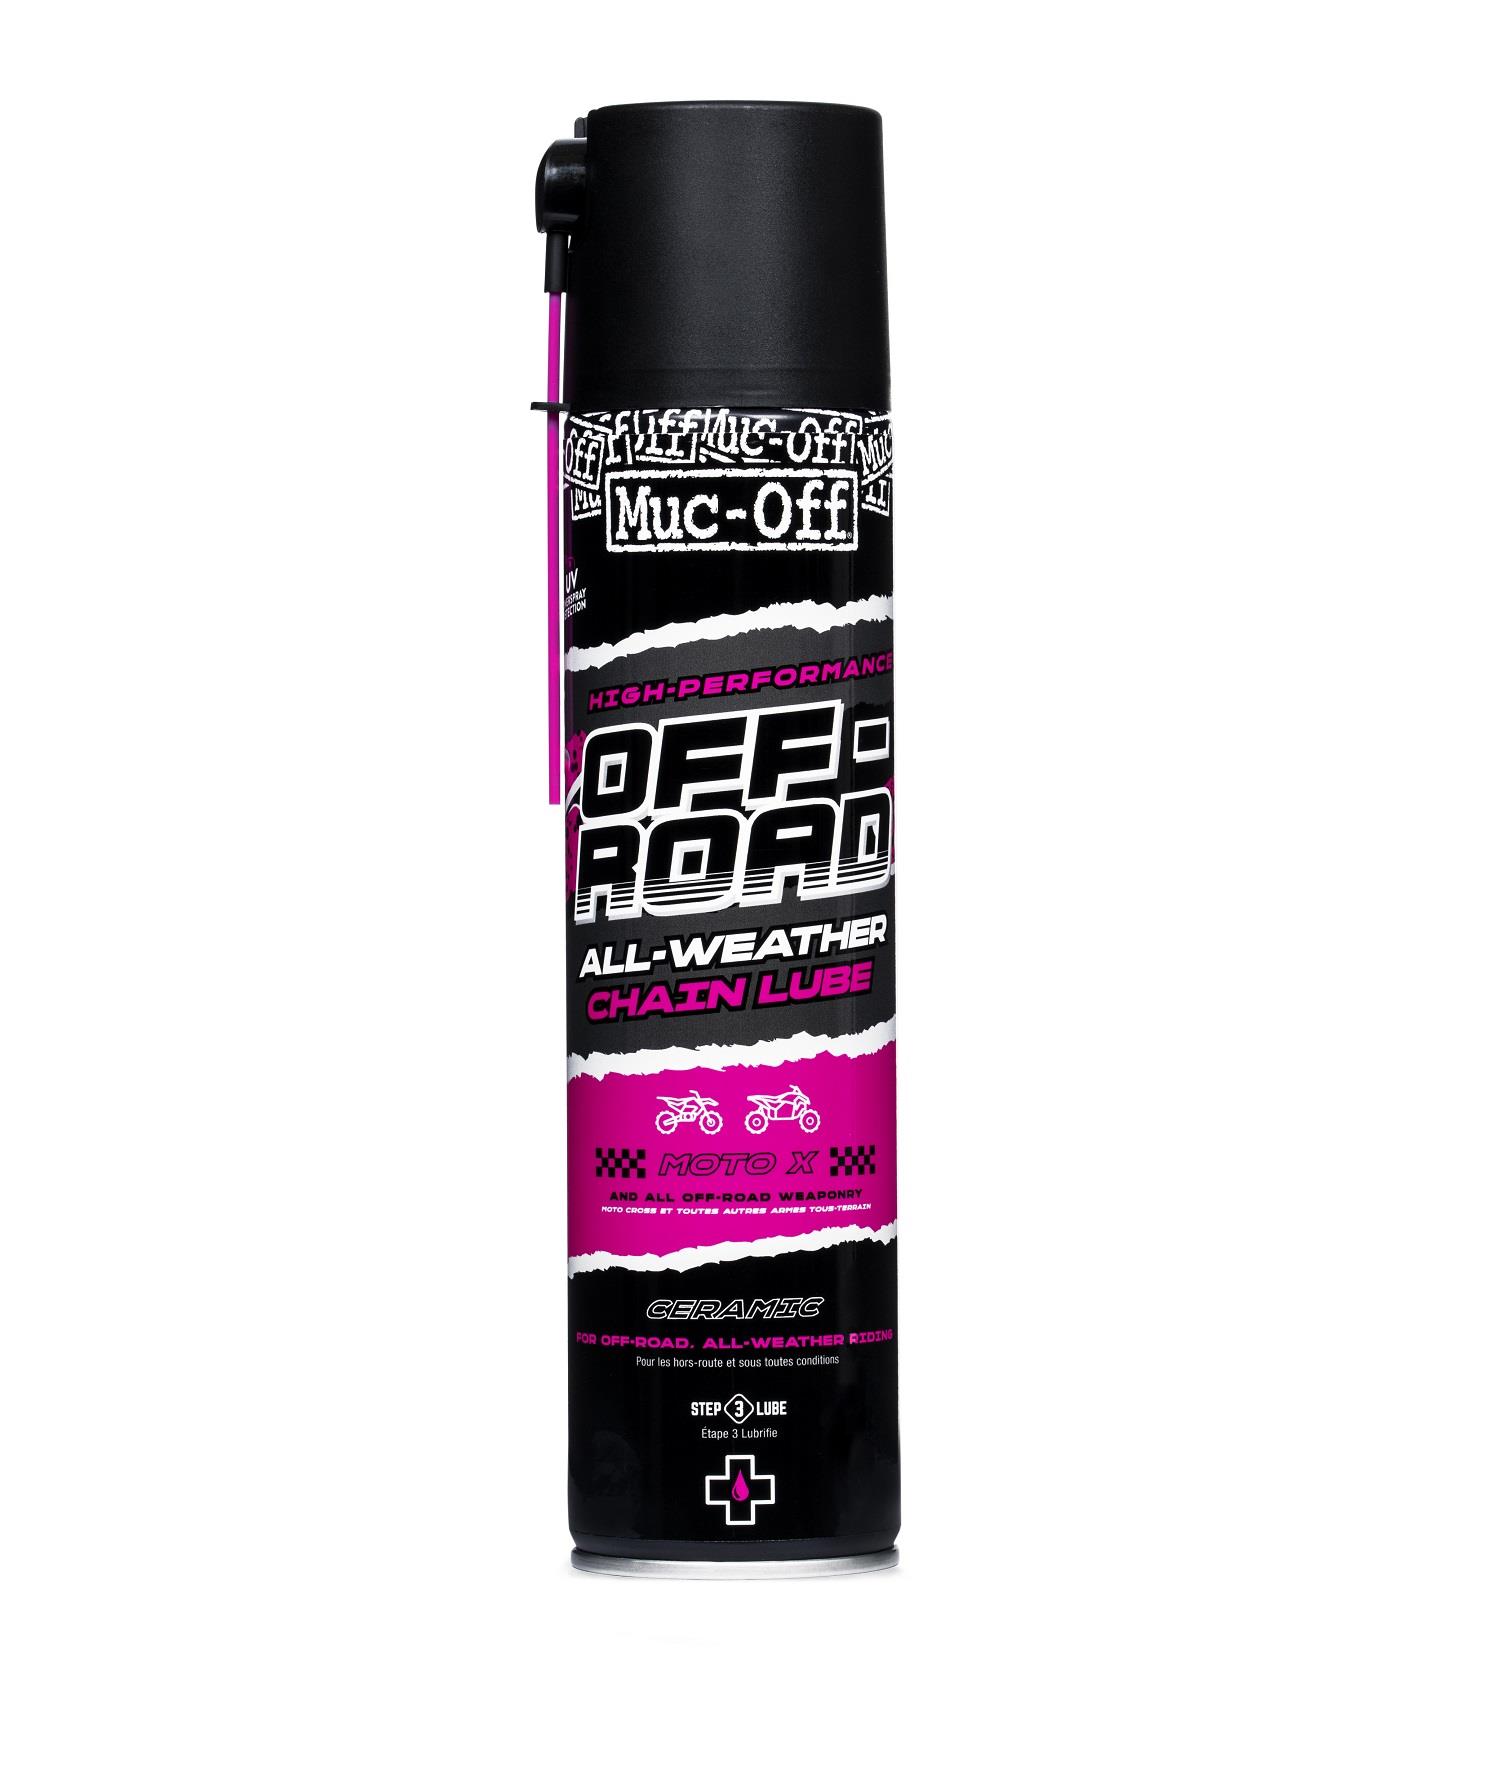 Muc-Off All Weather Chain Lube Off-Road